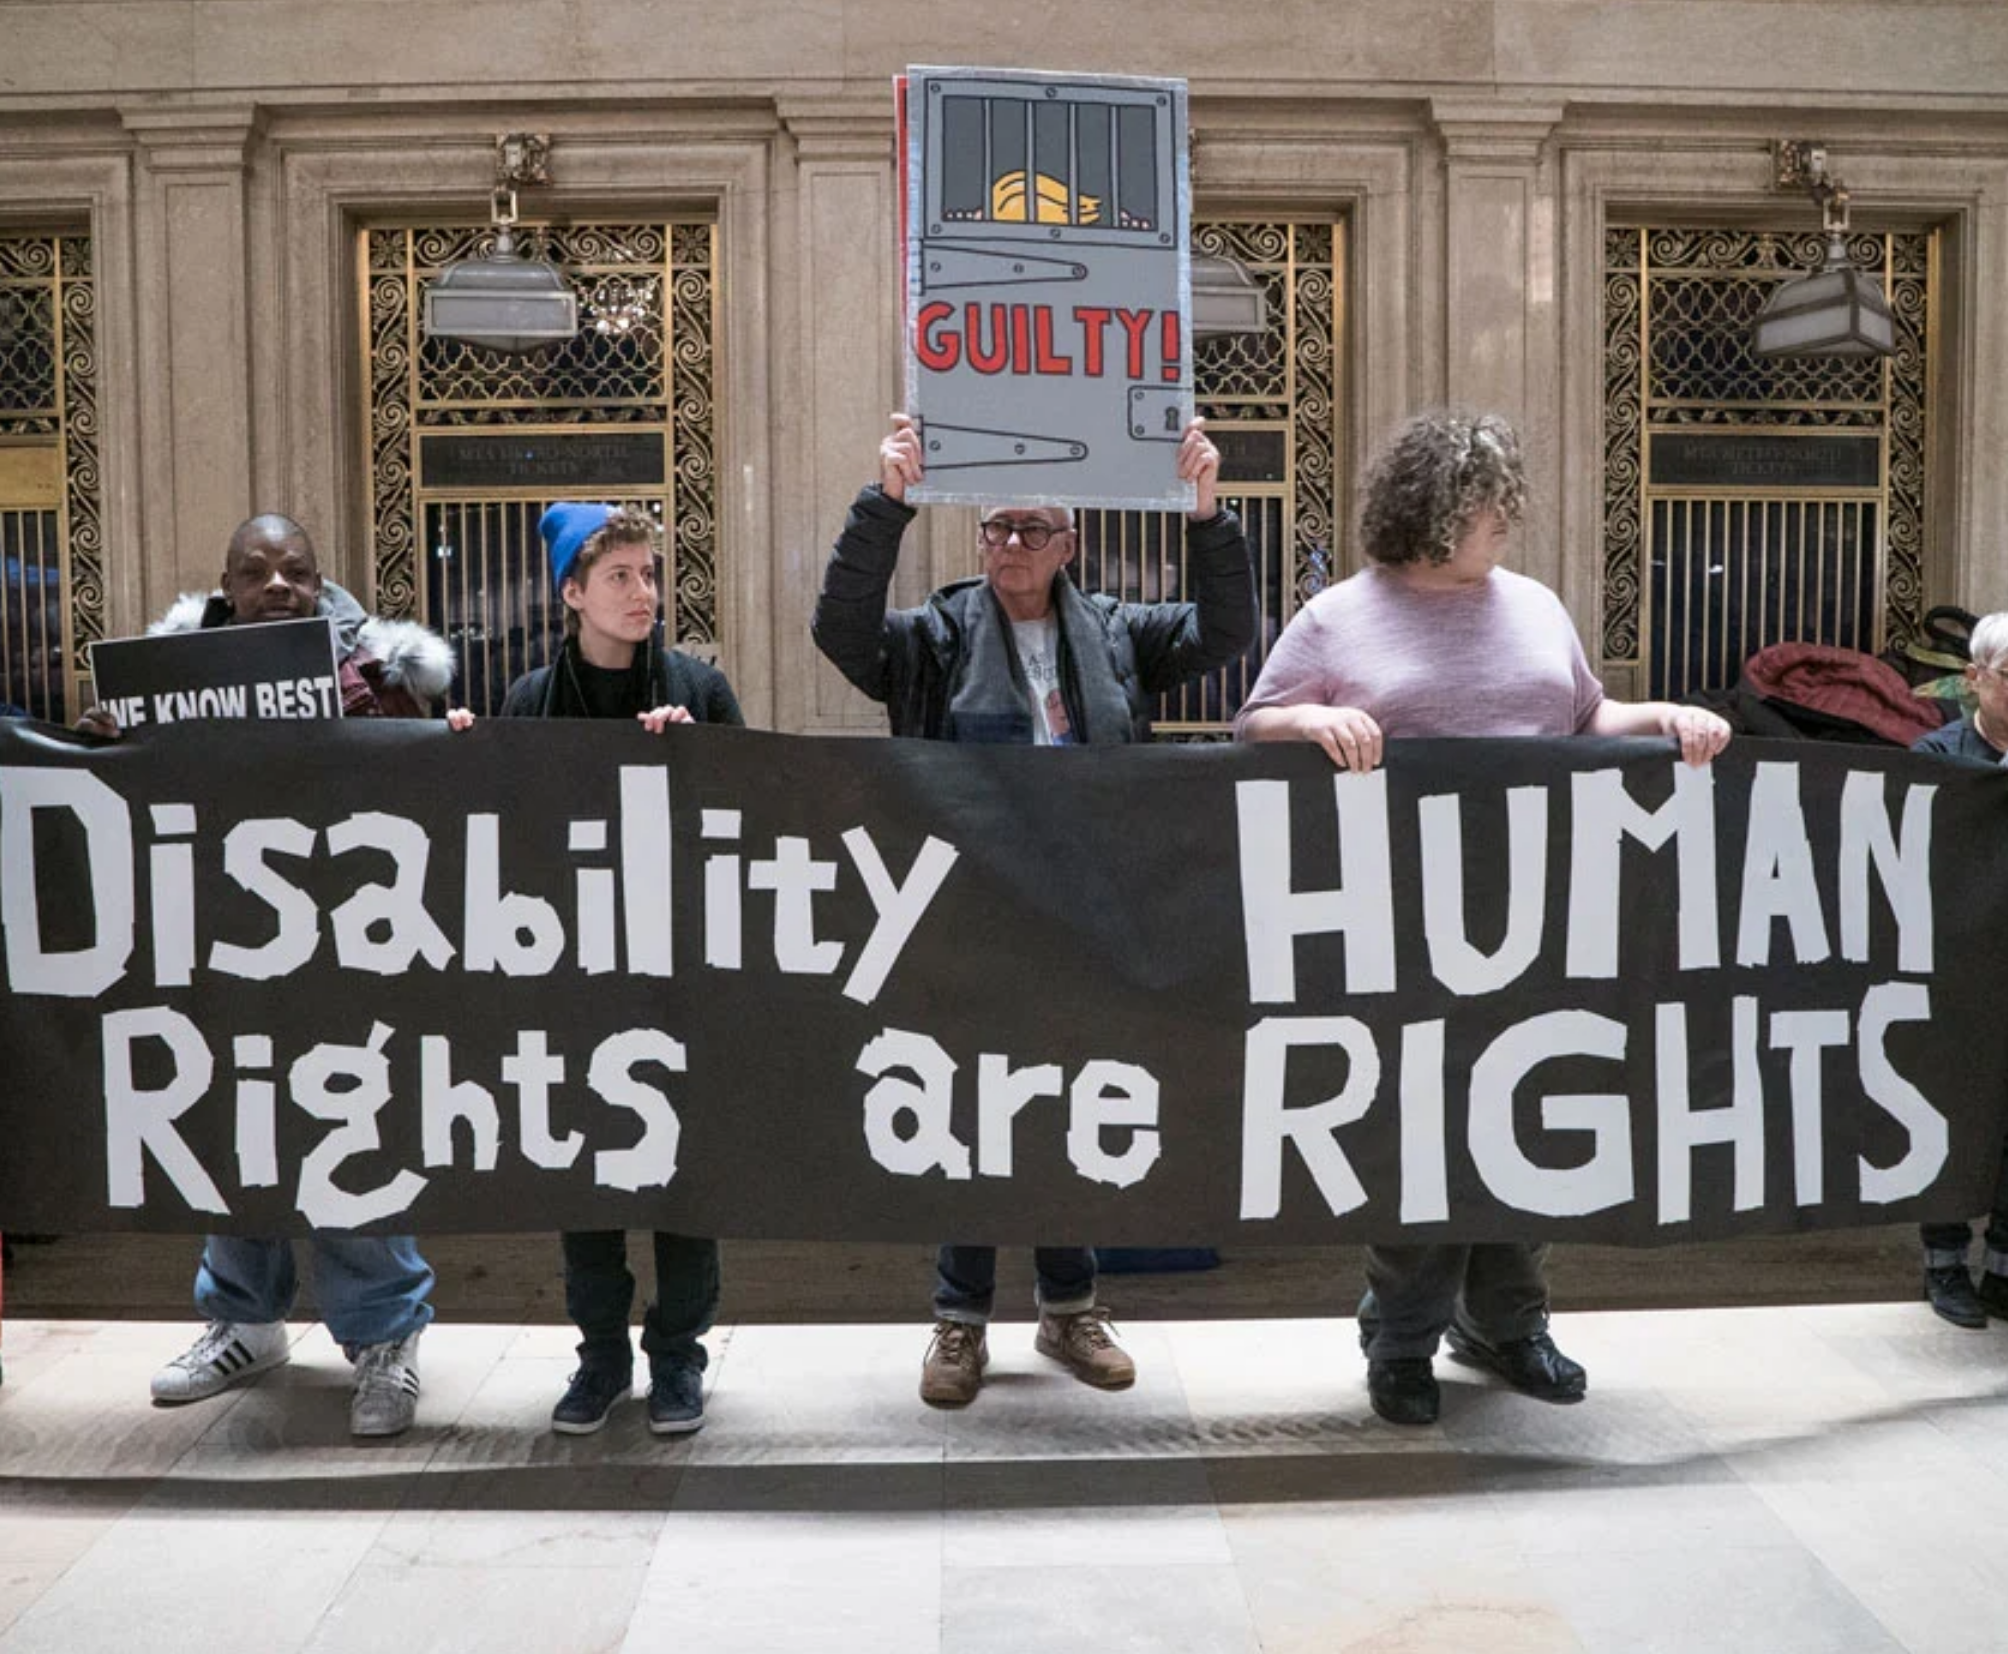 A group of people are out on the street collectively holding a giant sign saying "Disability Rights are Human Rights"